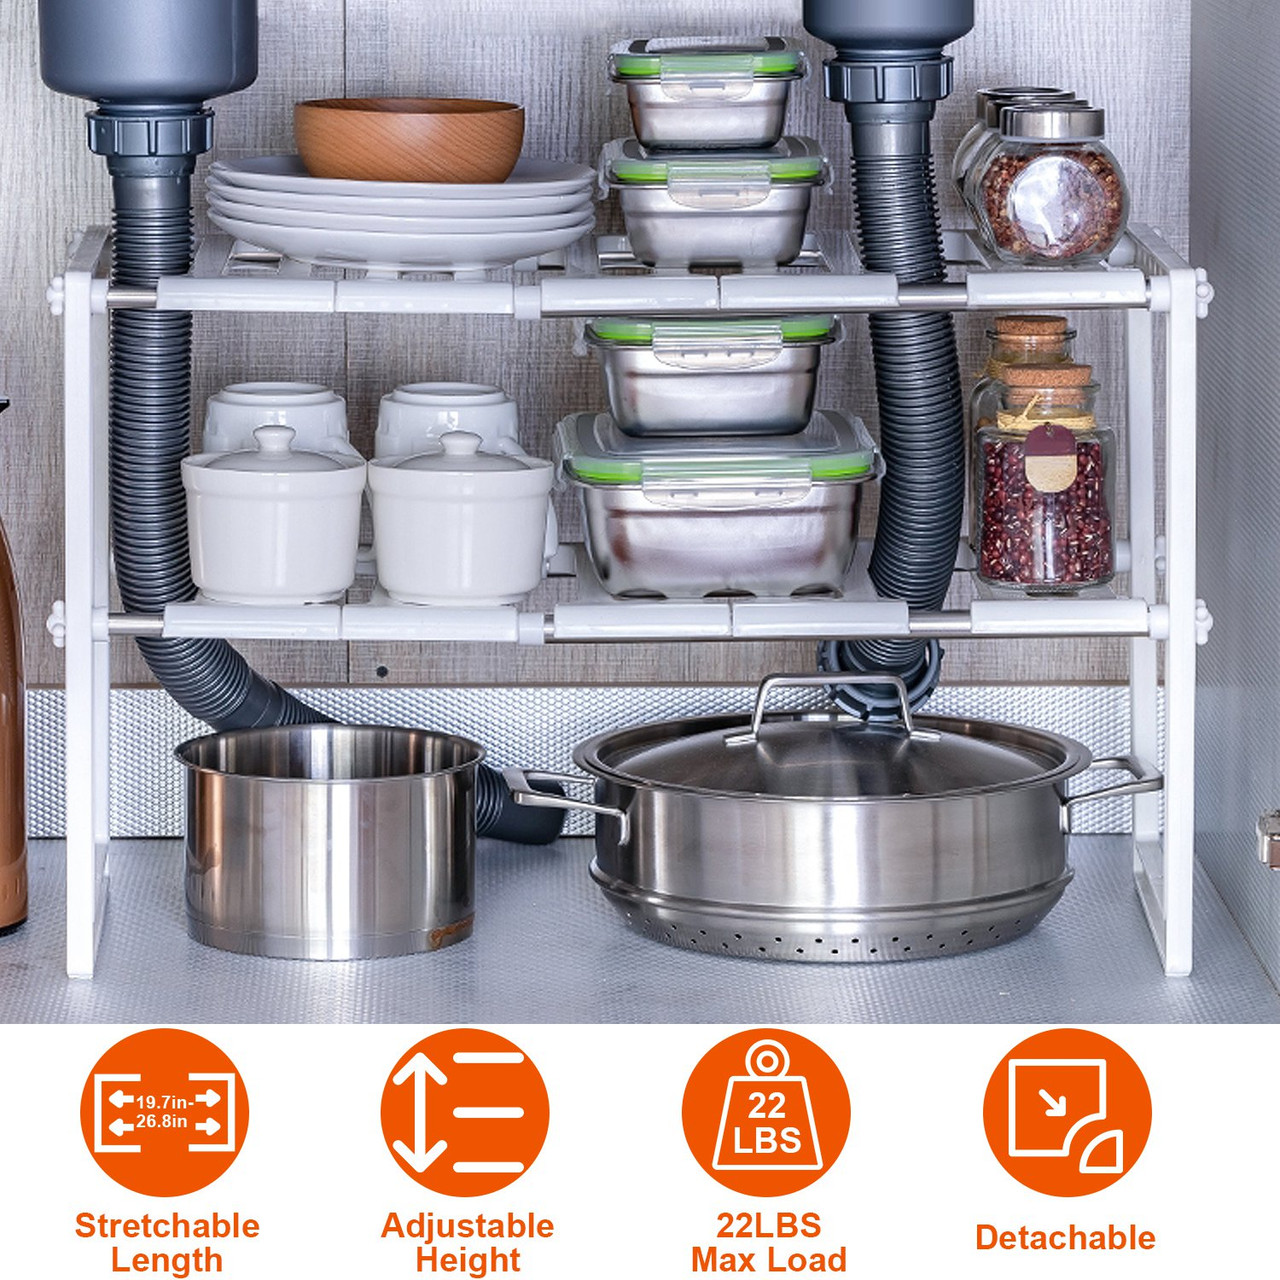 2-Tier Under Sink Organizing Rack product image